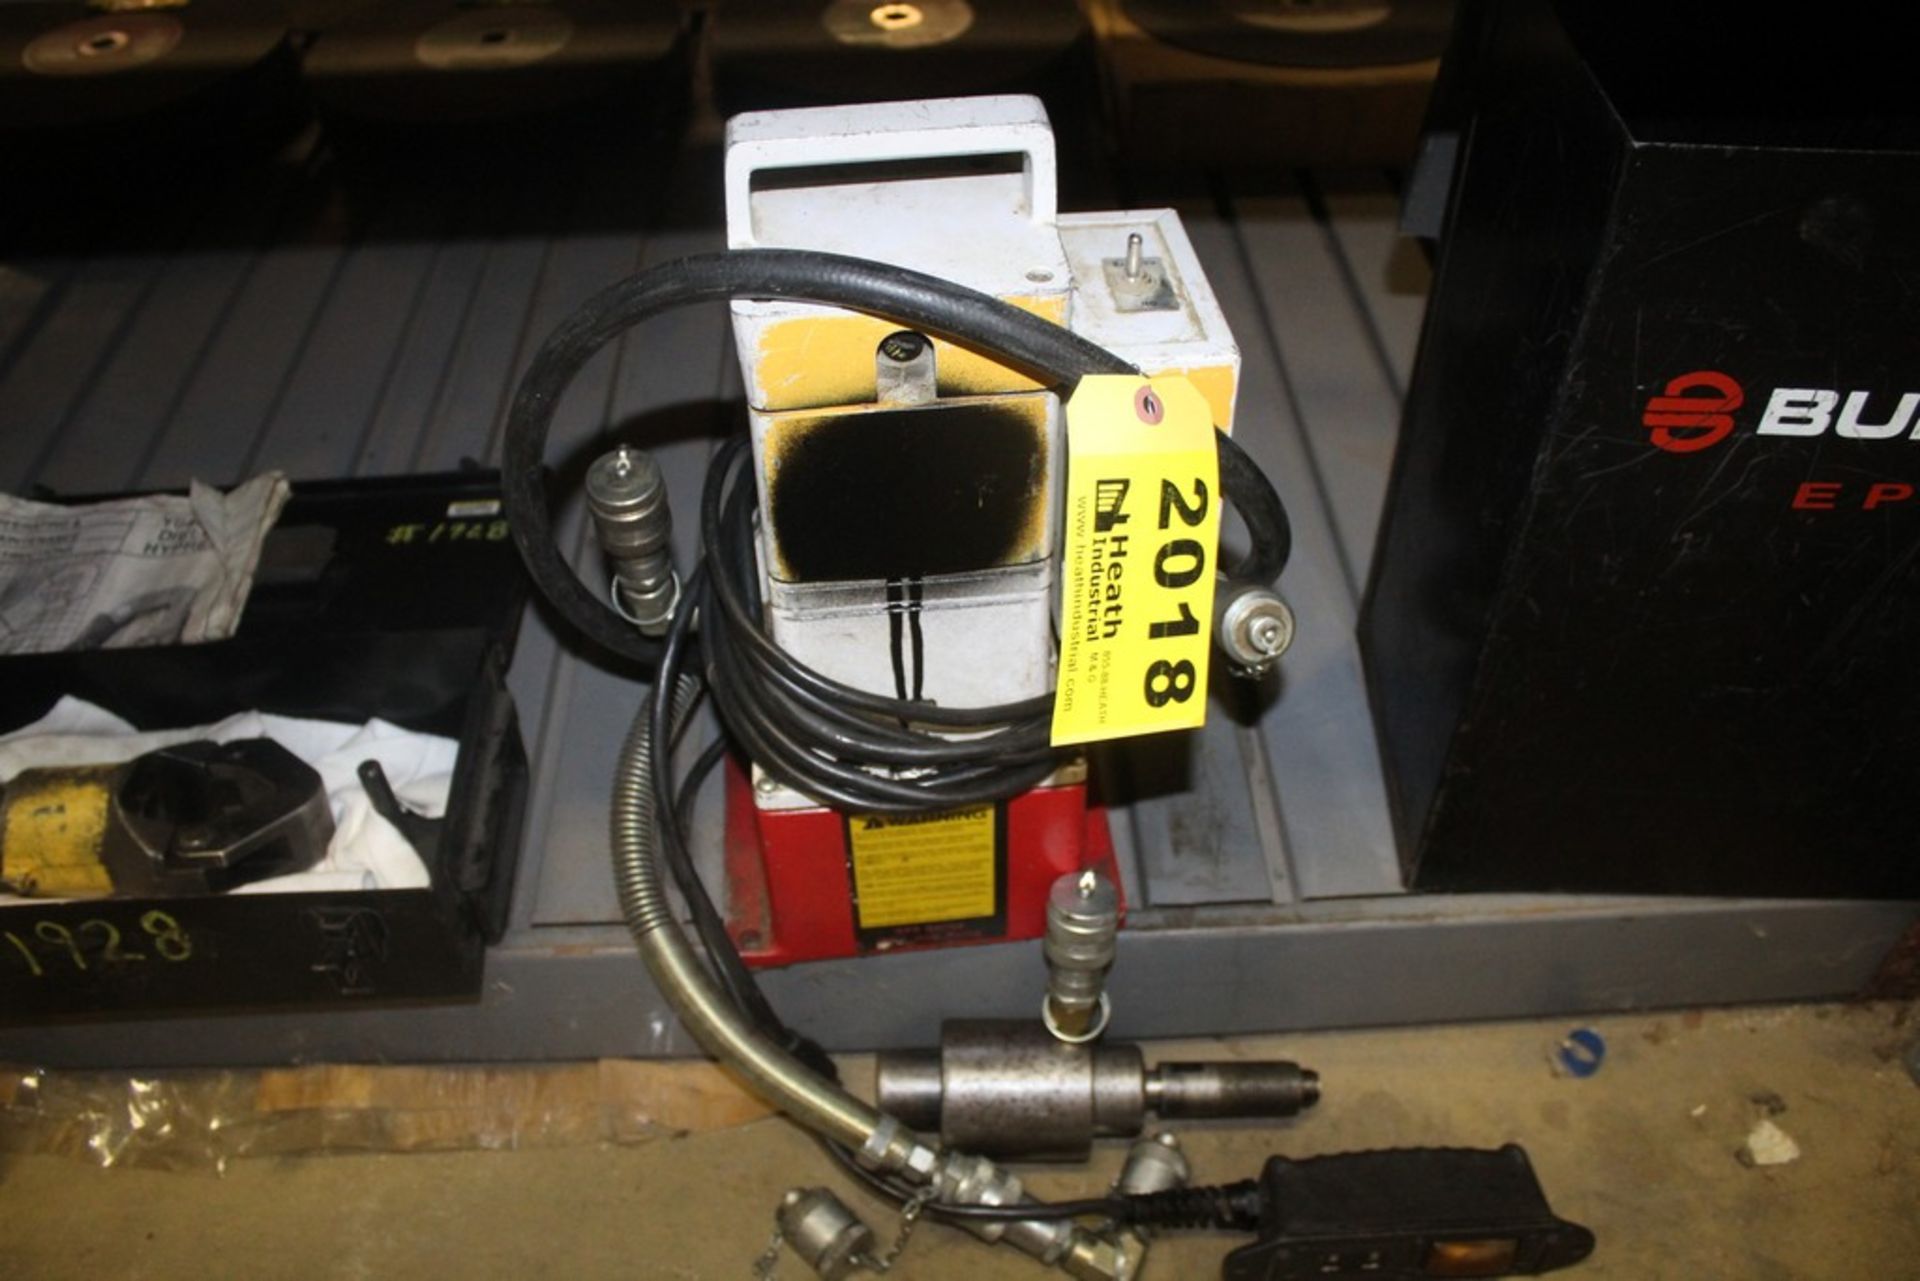 BURNDY MODEL EPP SERIES HYDRAULIC PUMP WITH CASE AND PENDANT CONTROLS - Image 2 of 2